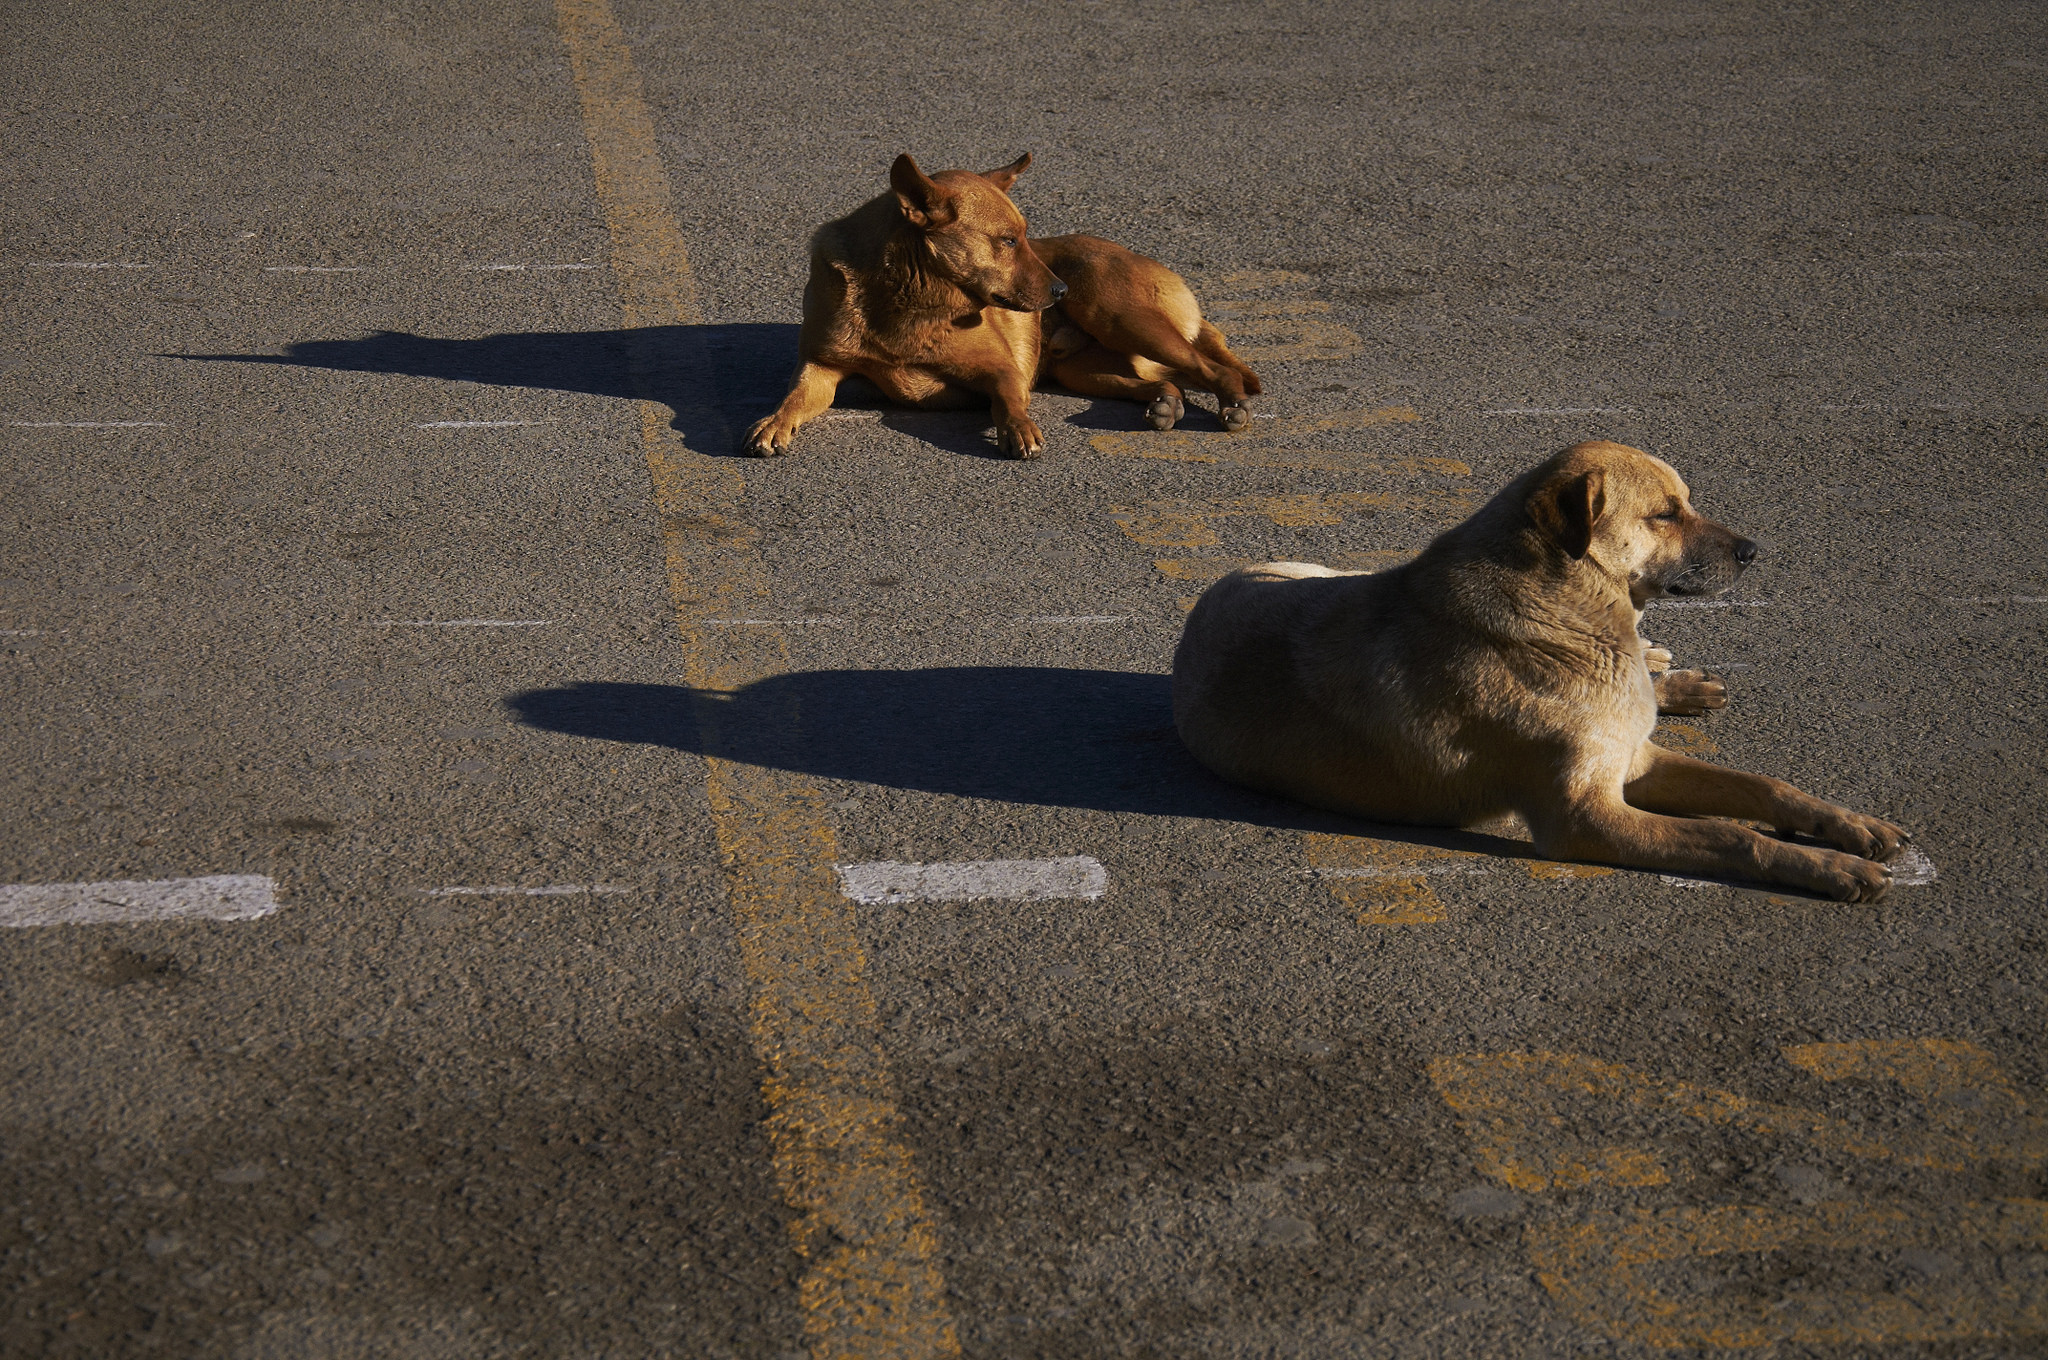 Dogs on the street. Credit: jonnyscholes/Flickr, CC BY 2.0